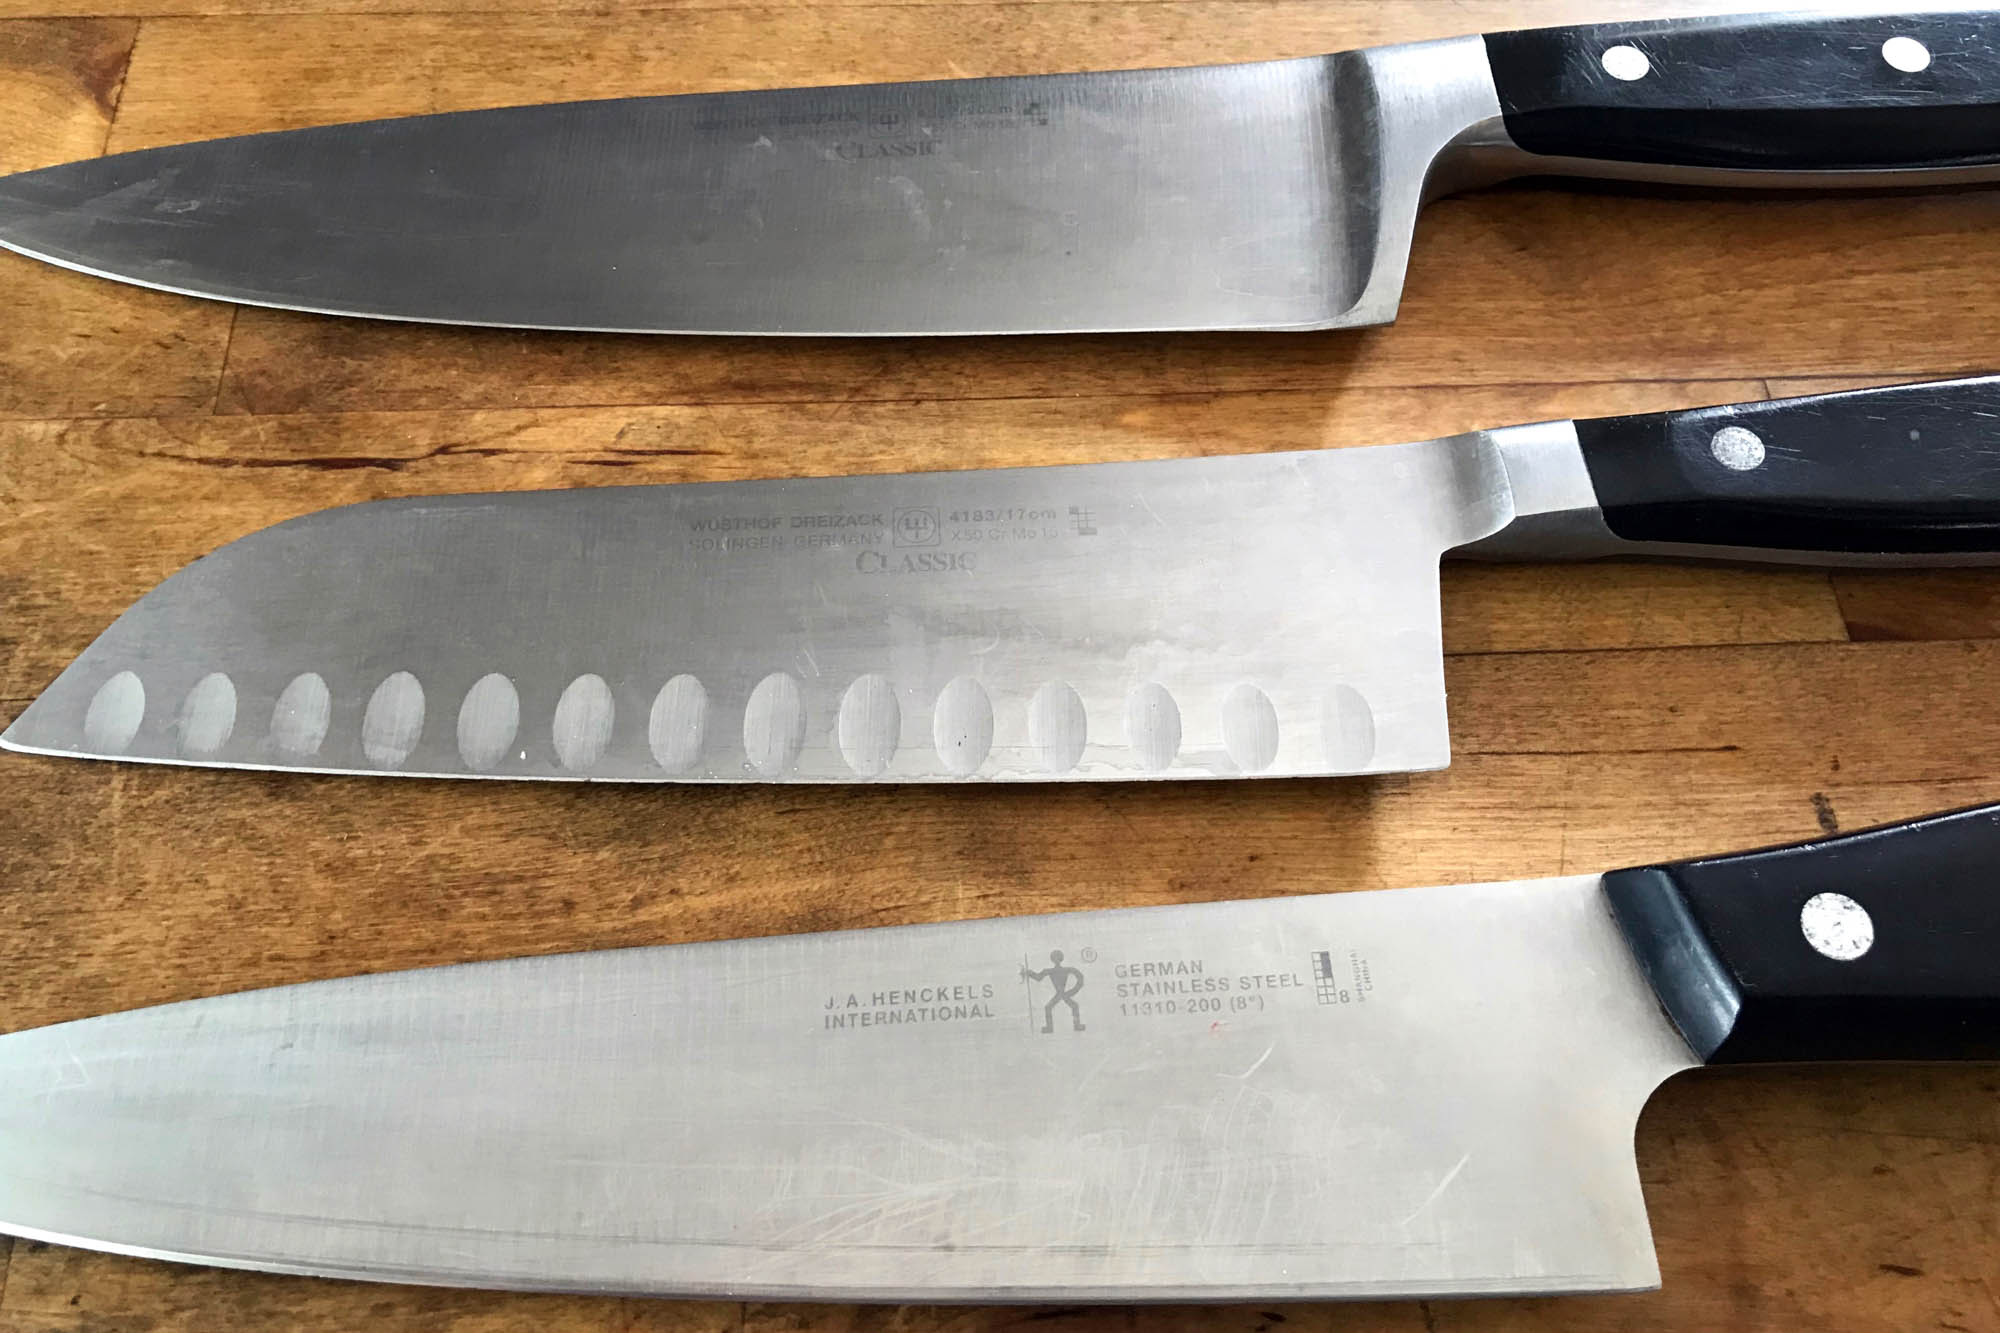 Three different style knives on butcher block